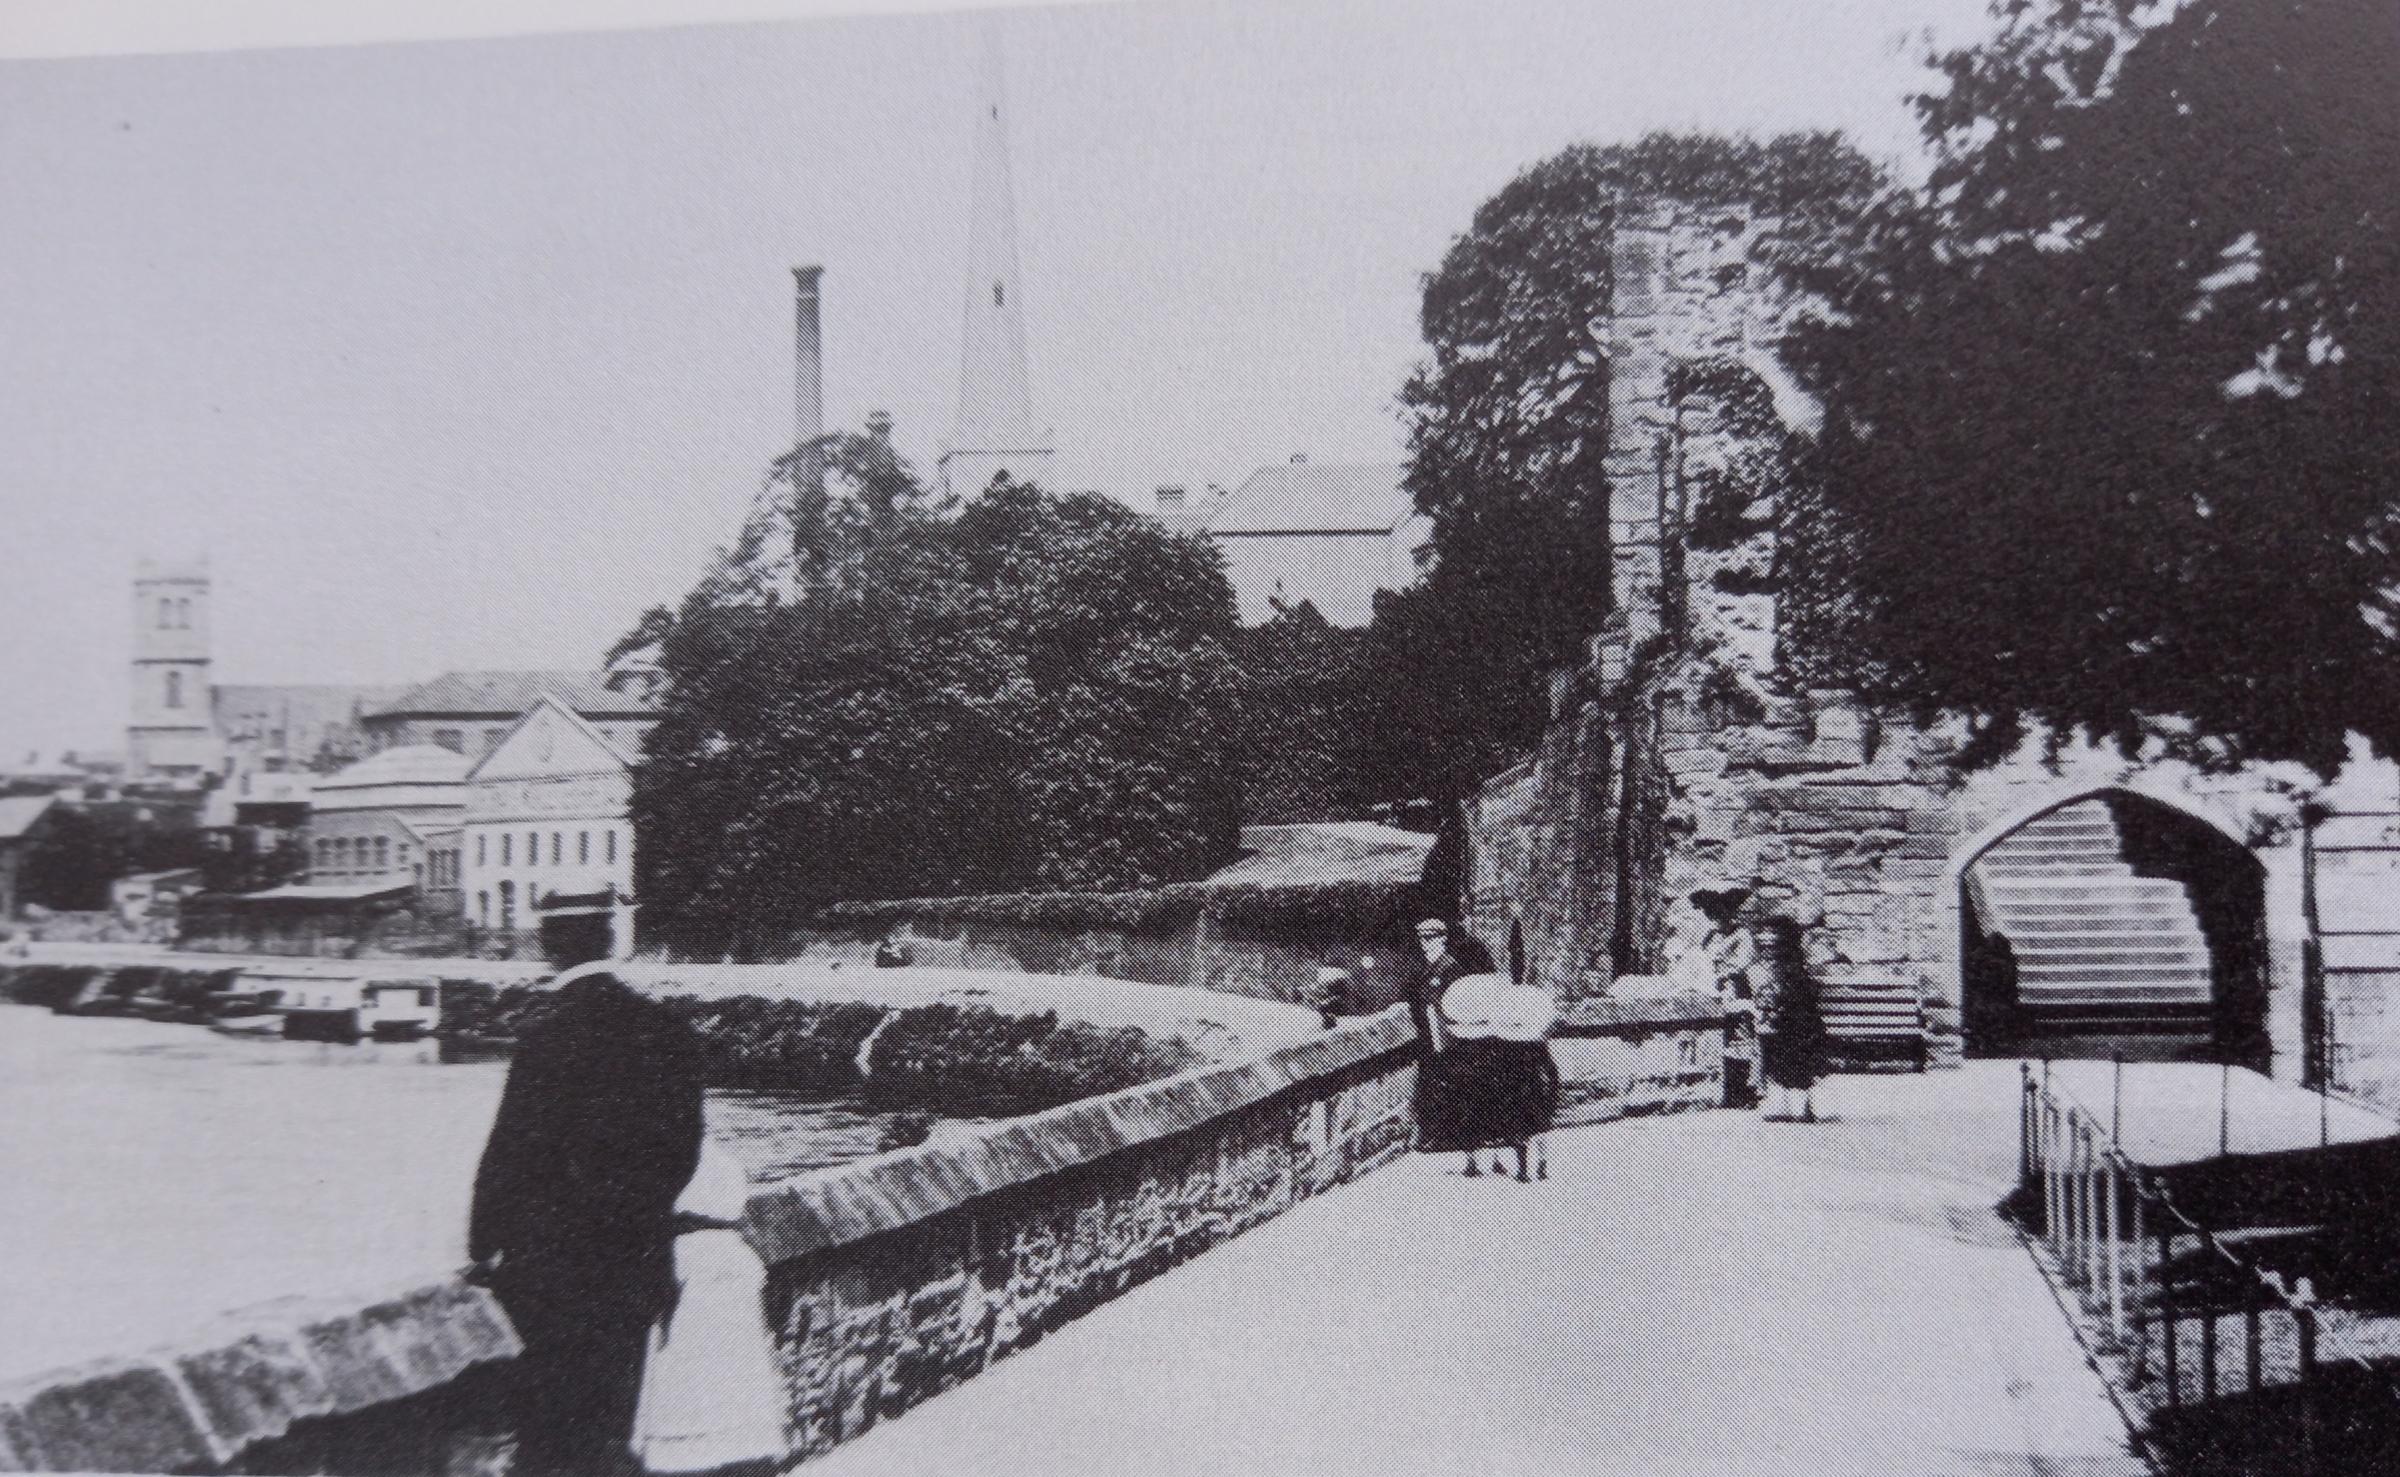 Time warp image of The Promenade alongside the river at Worcester from the Cathedral to South Quay taken in 1910